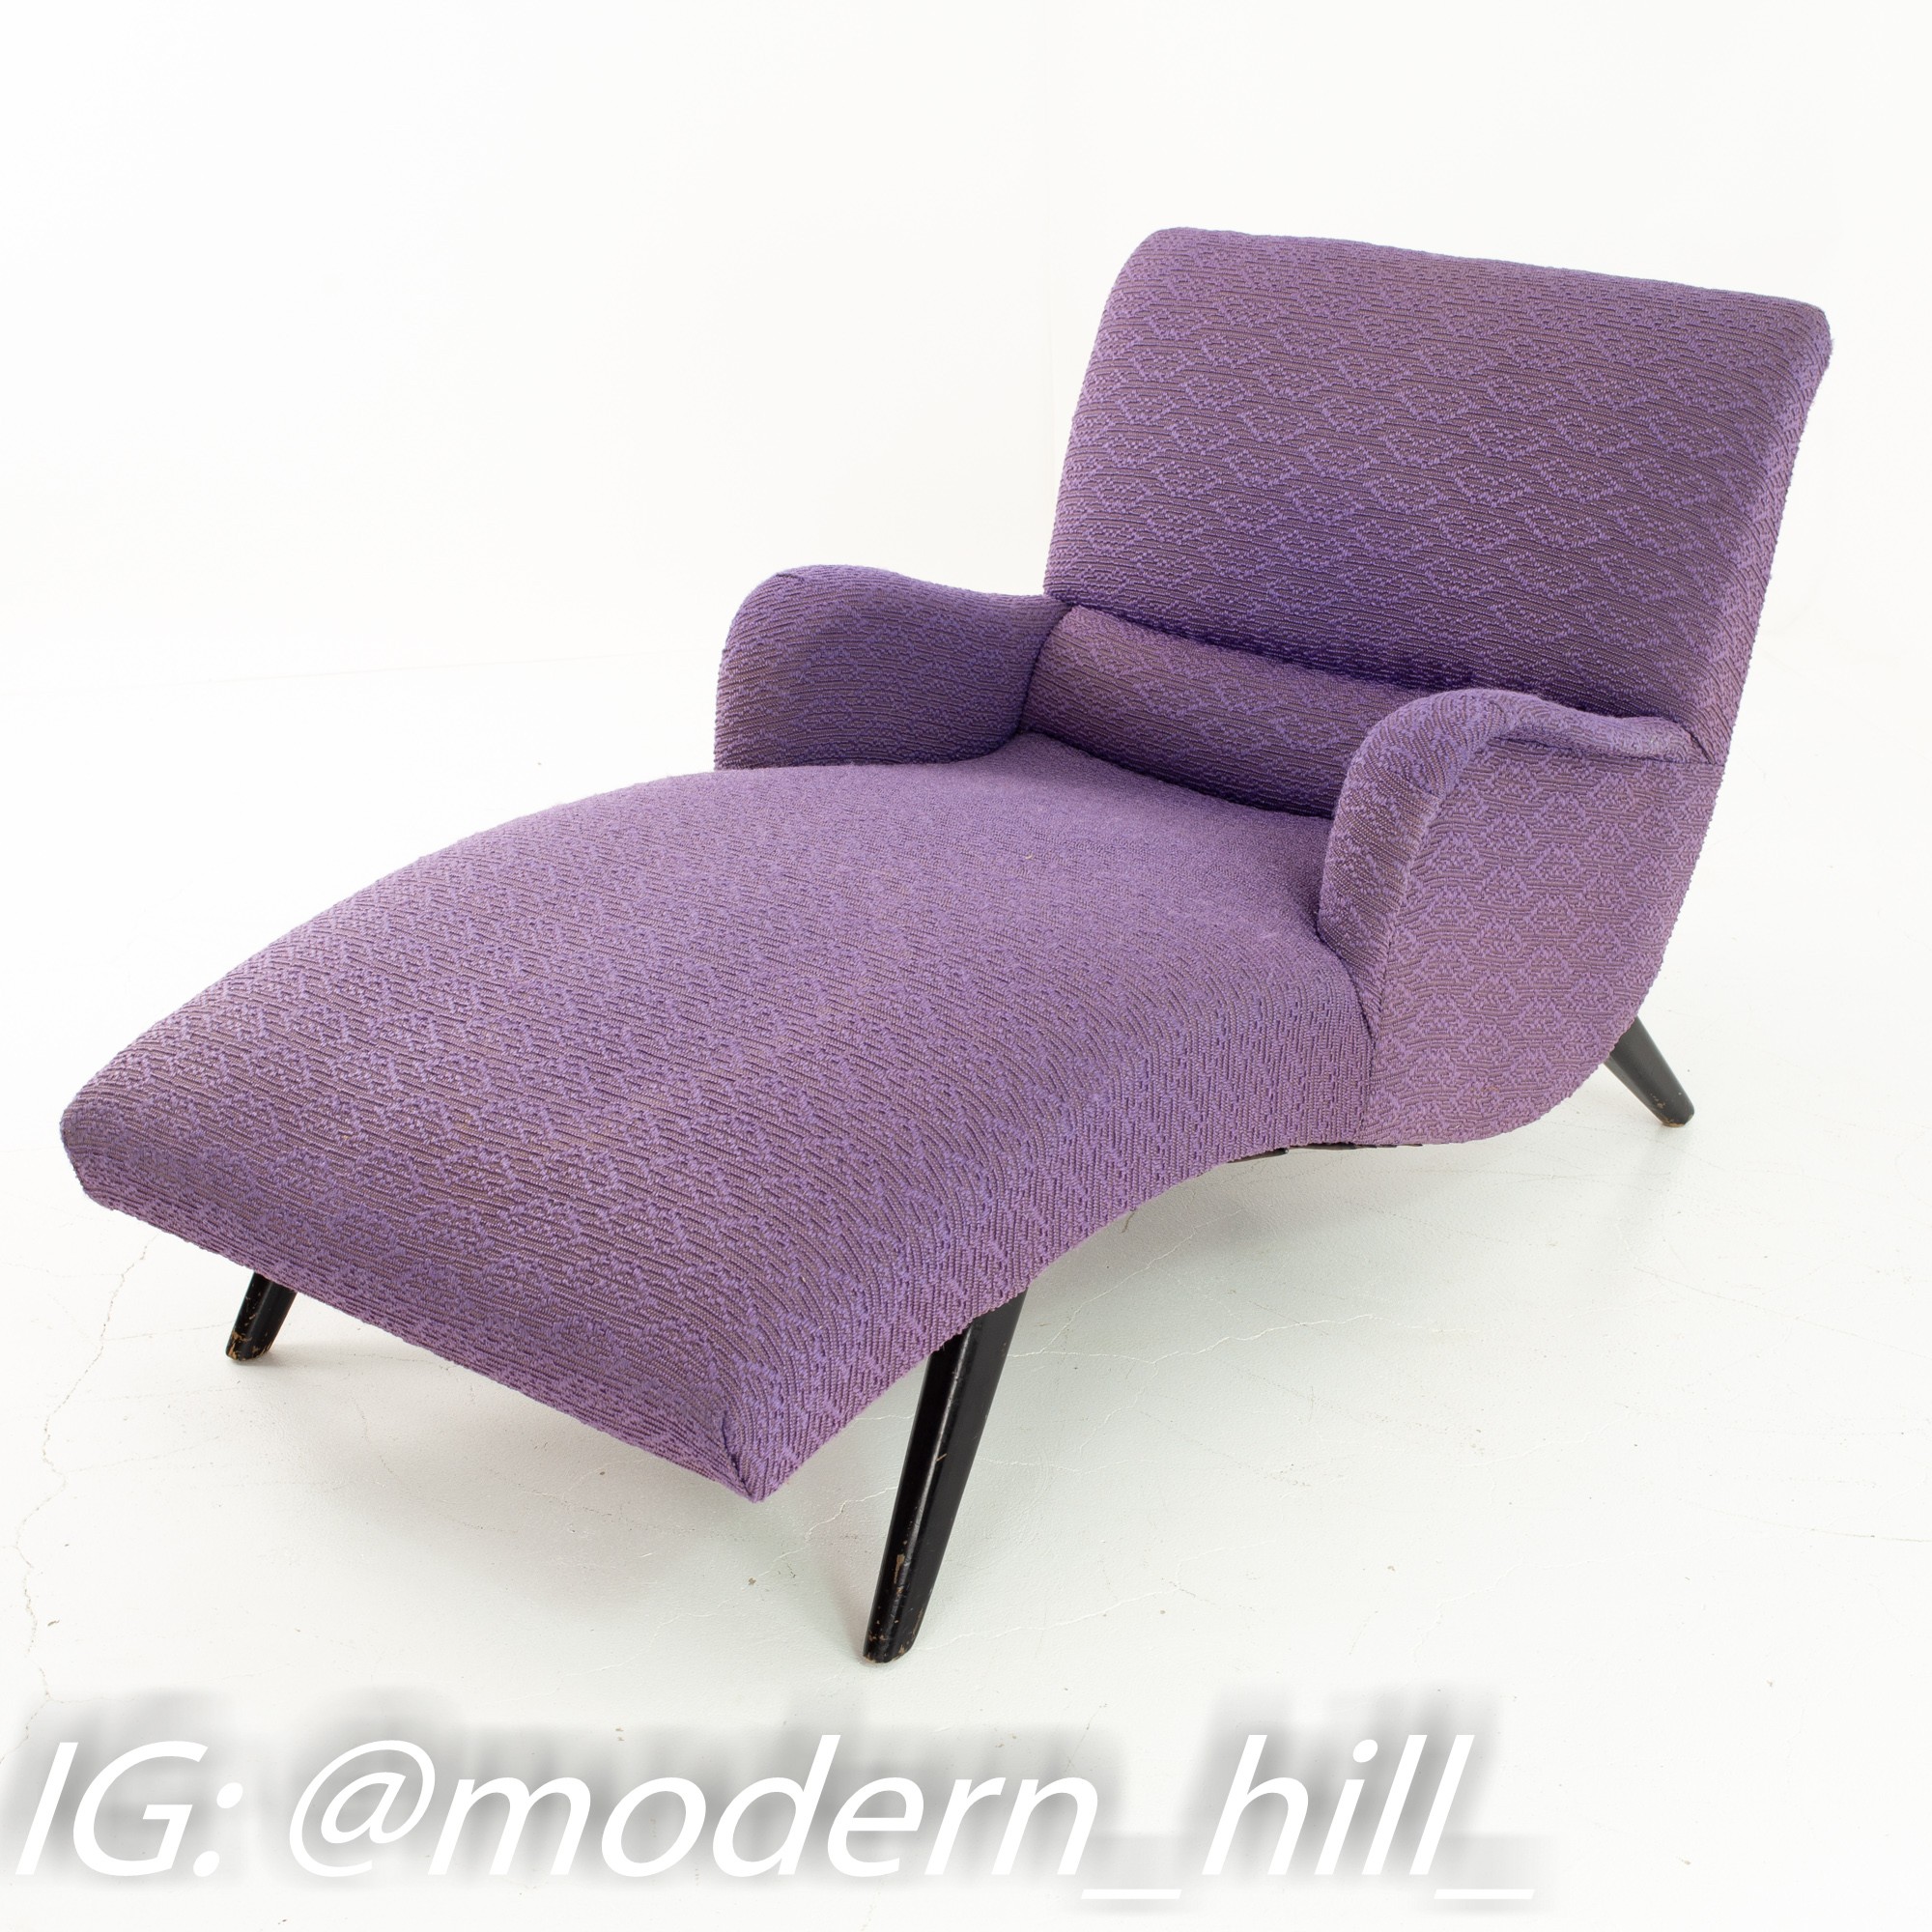 Greta Magnusson Grossman for Chaircraft Mid Century Chaise Lounge Chair